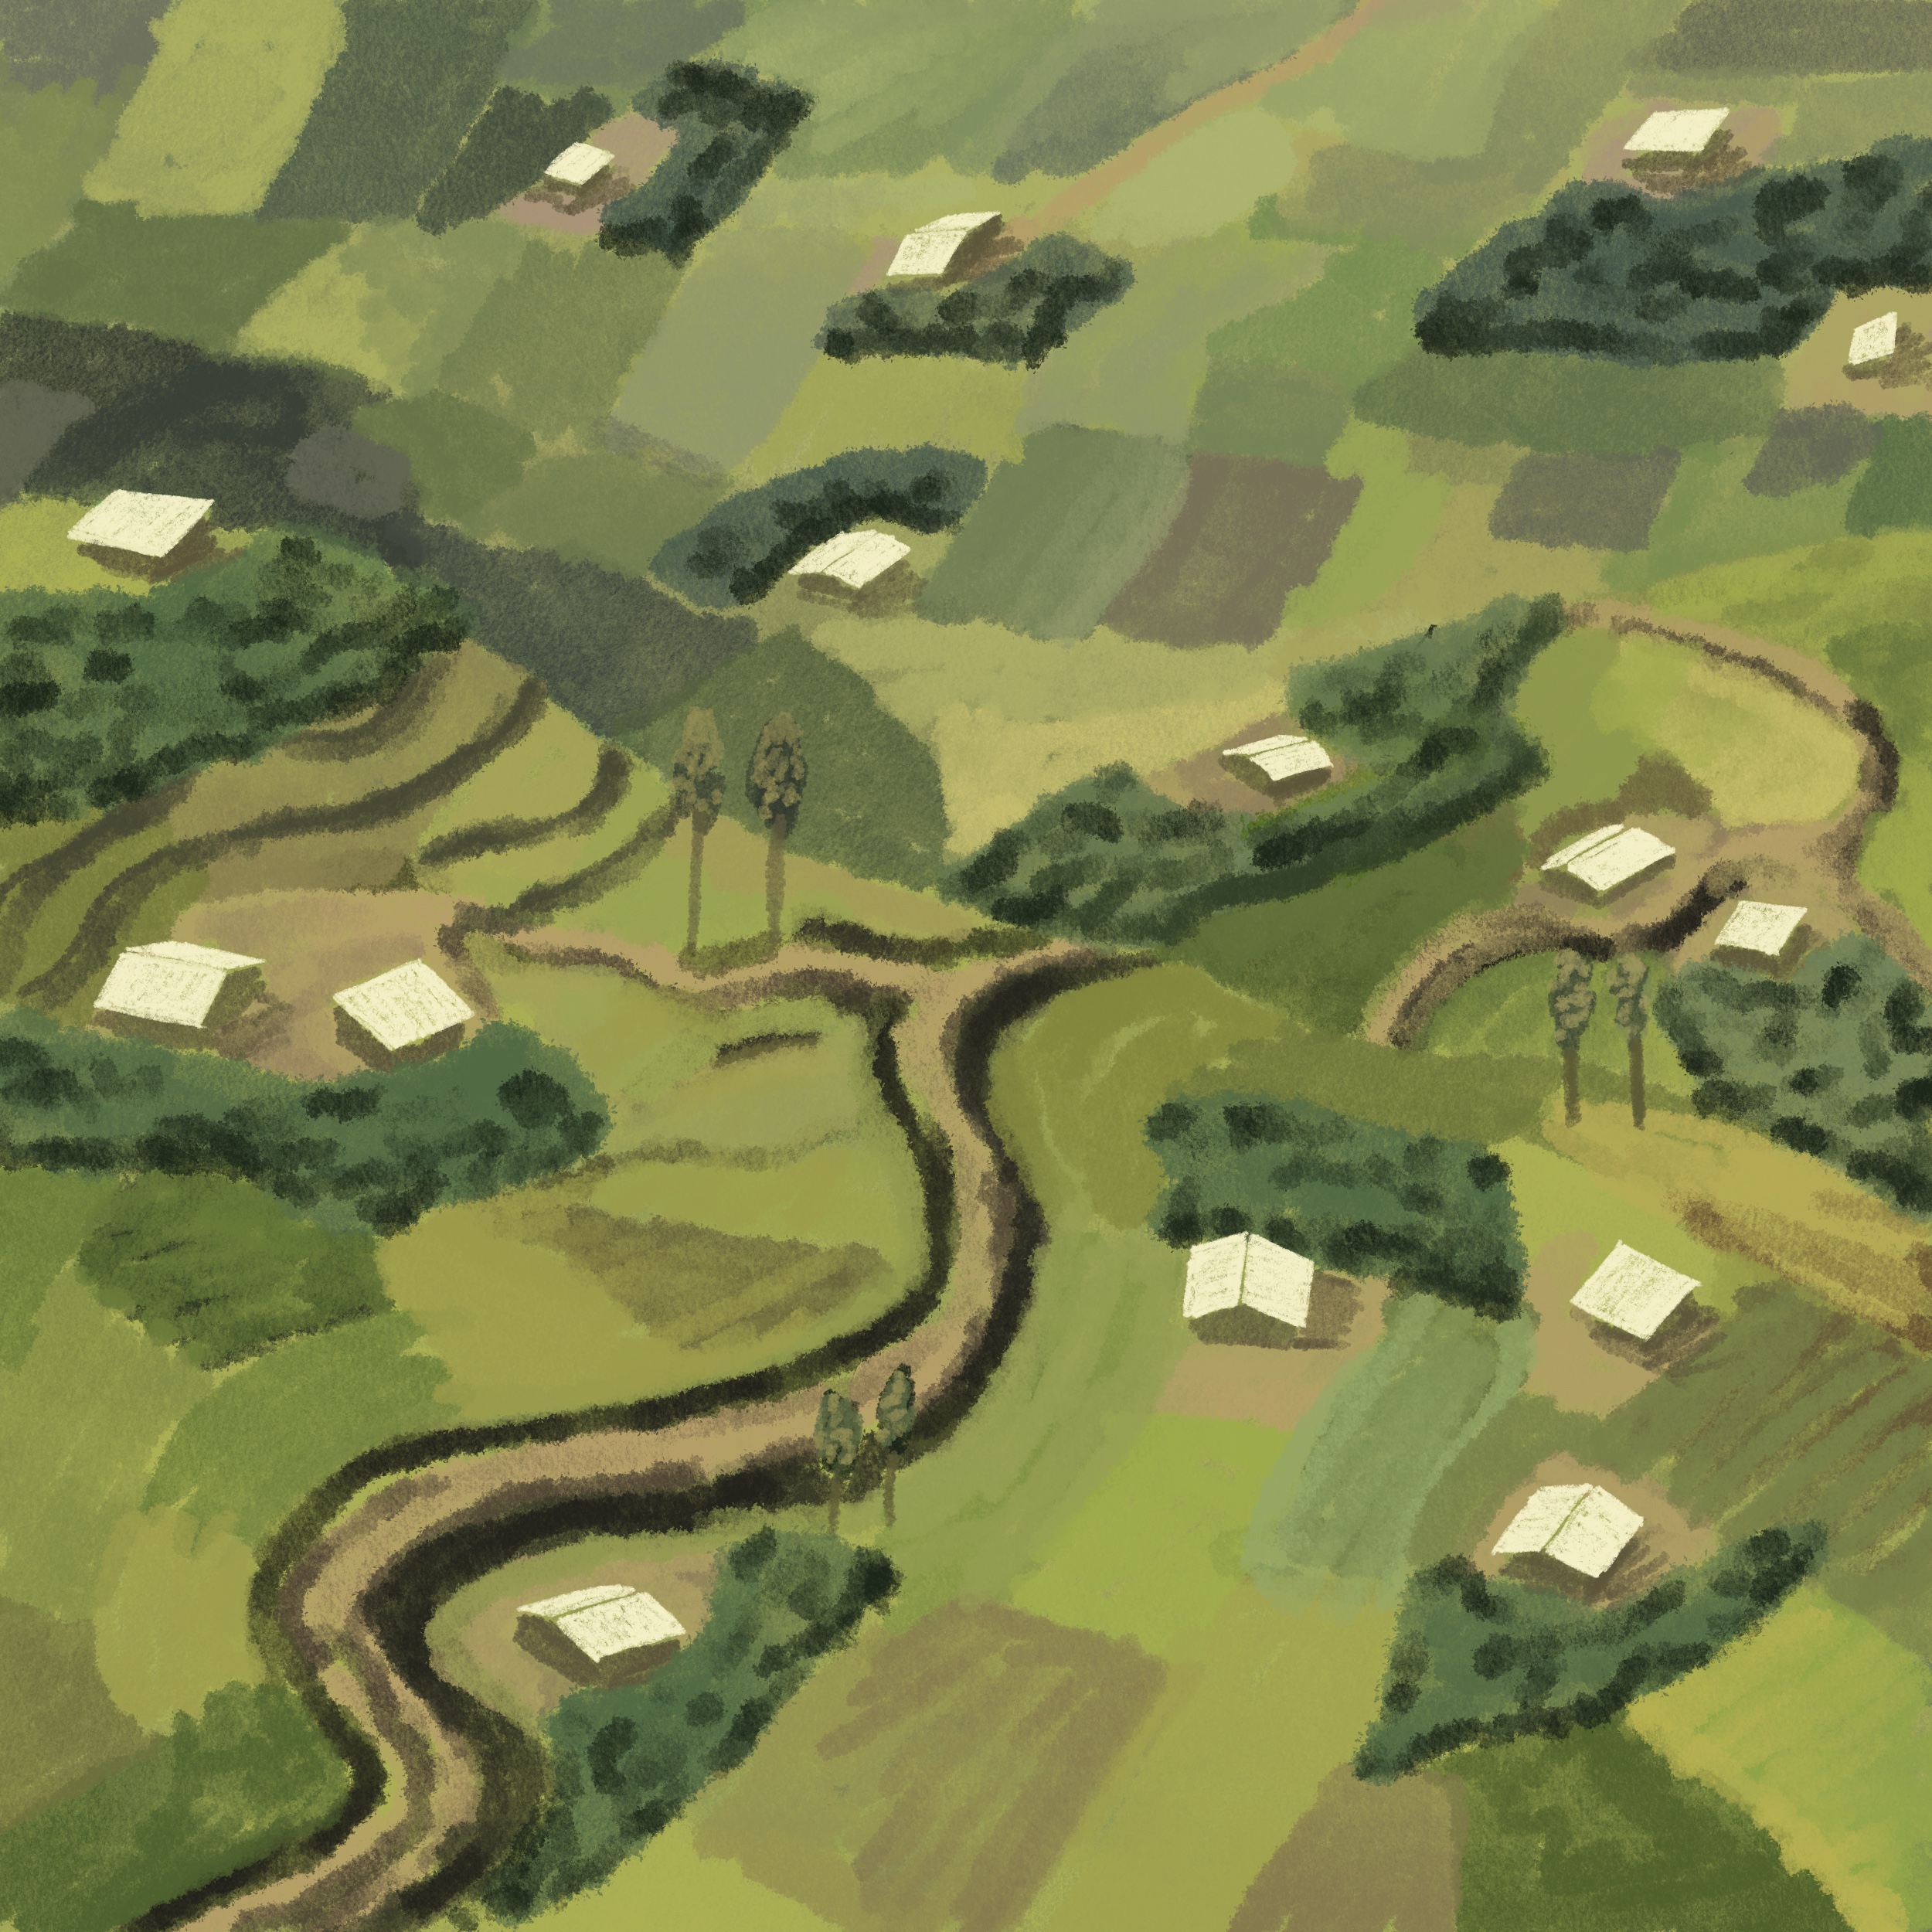 Digital work of golden-green colours, showing a landscape from the air.